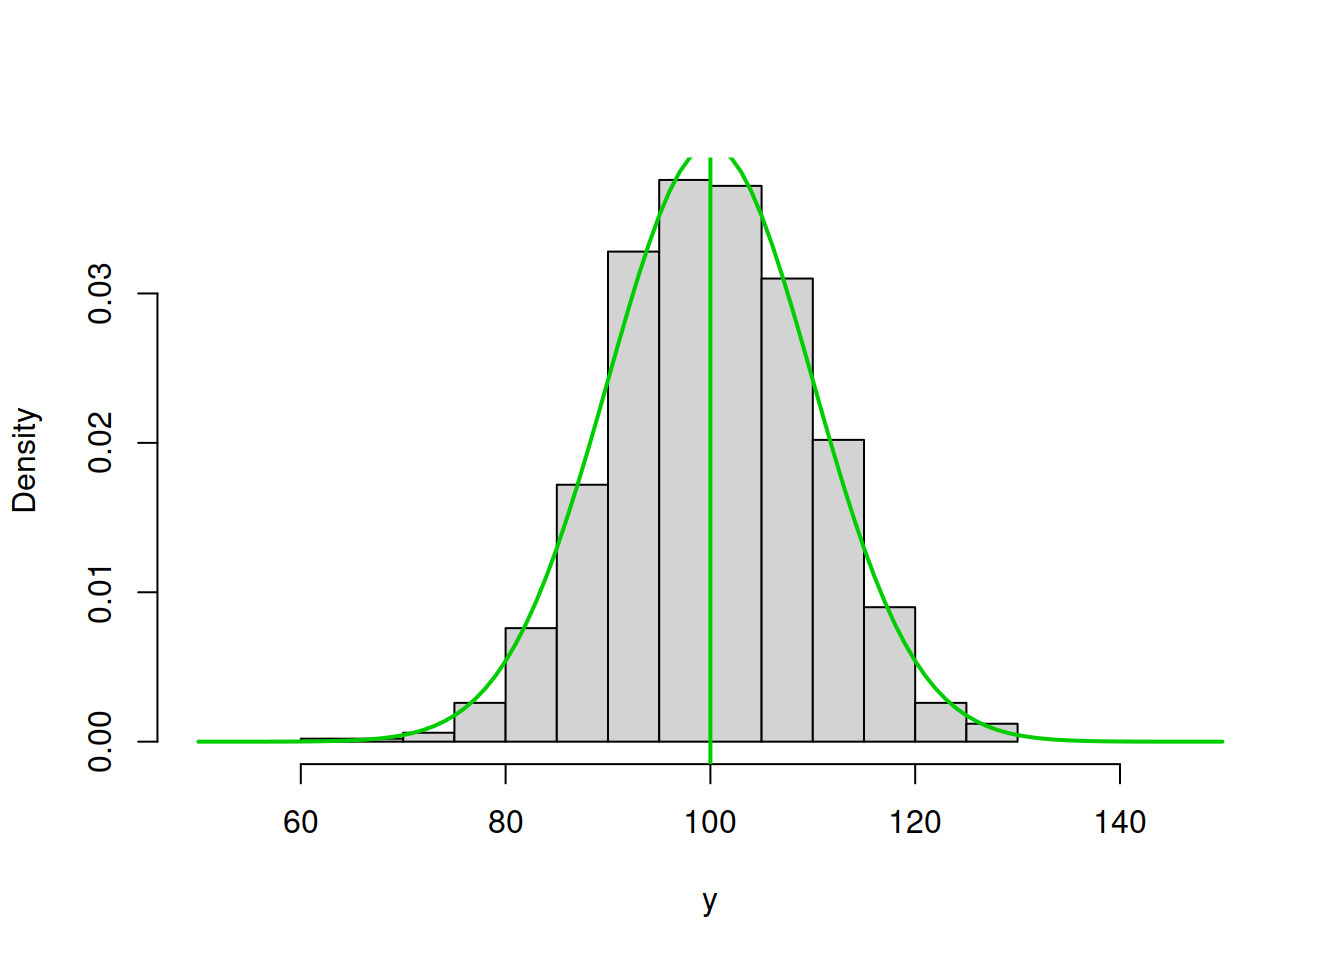 ML example with Normal curve and $\hat{\mu}_y=100$ and $\hat{\sigma}=10$